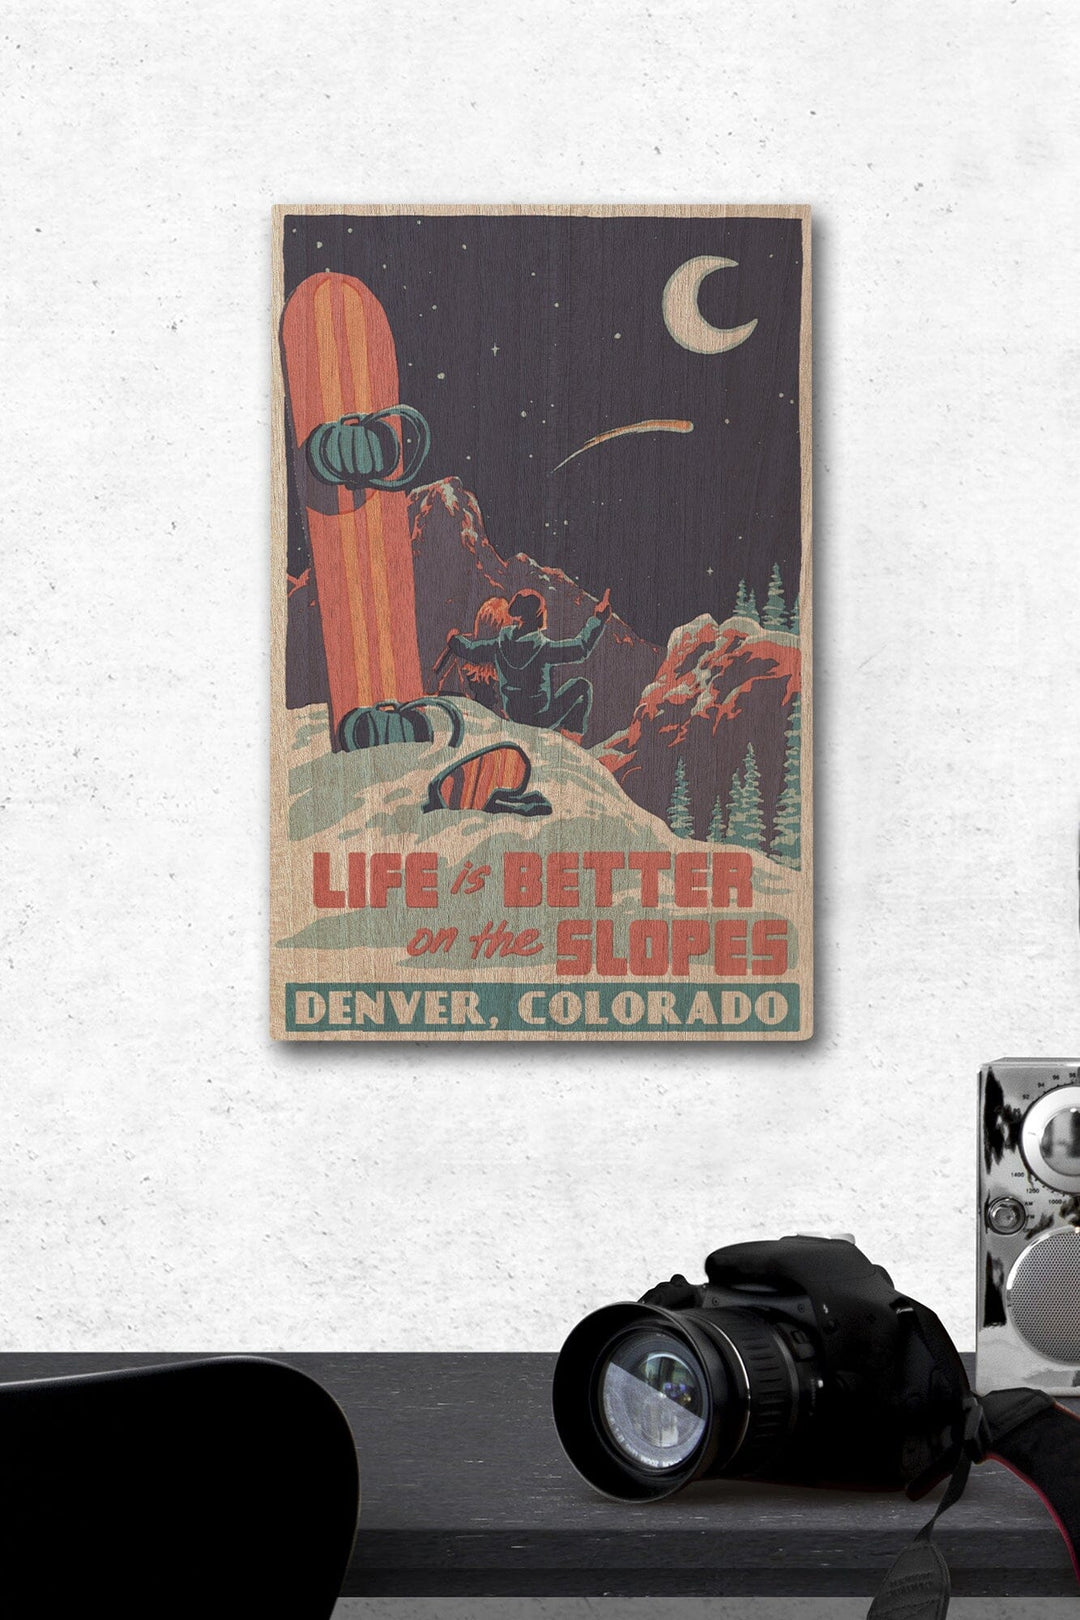 Denver, Colorado, Life is Better on the Slopes, Wood Signs and Postcards Wood Lantern Press 12 x 18 Wood Gallery Print 